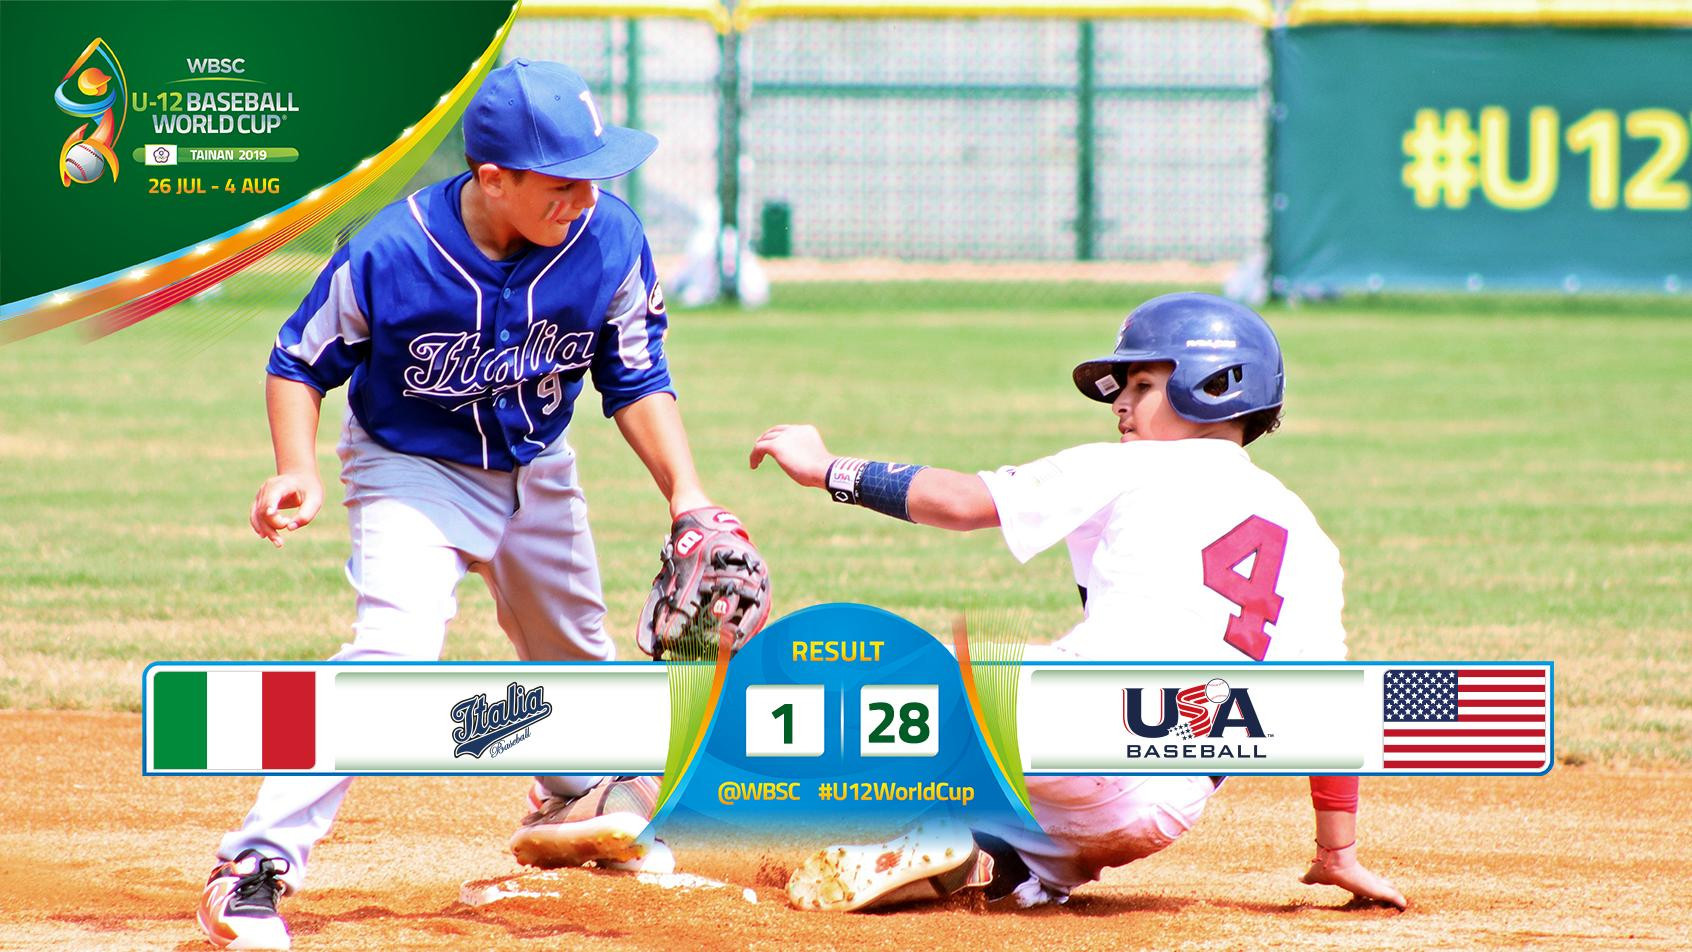 United States eased past Italy to get back to winning ways ©WBSC